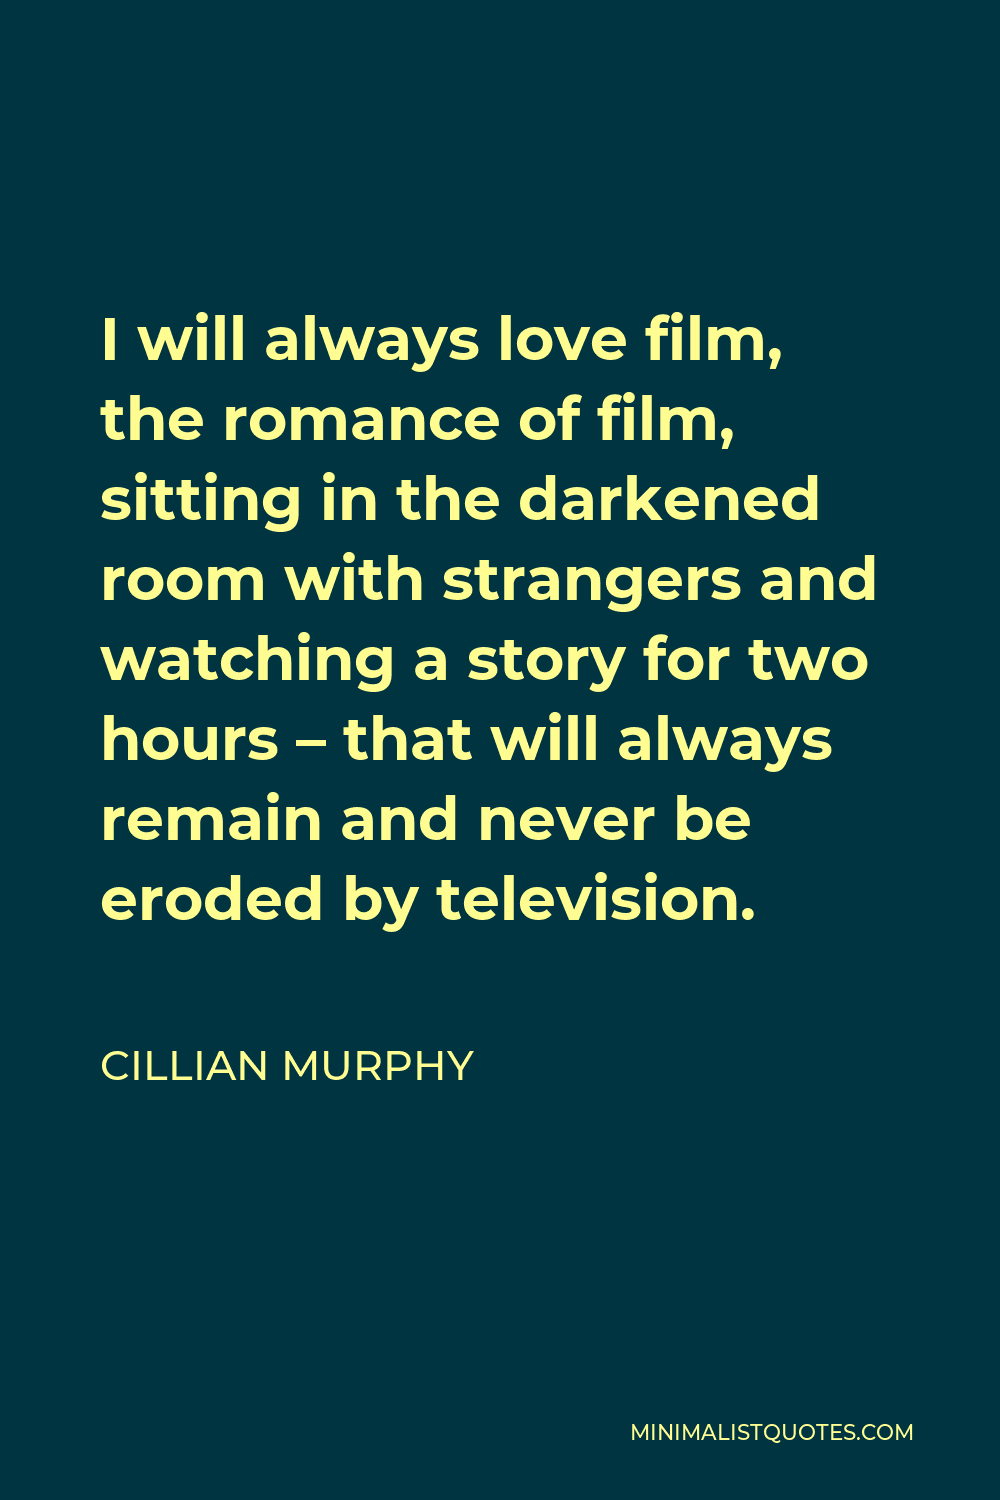 Cillian Murphy Quote - I will always love film, the romance of film, sitting in the darkened room with strangers and watching a story for two hours – that will always remain and never be eroded by television.